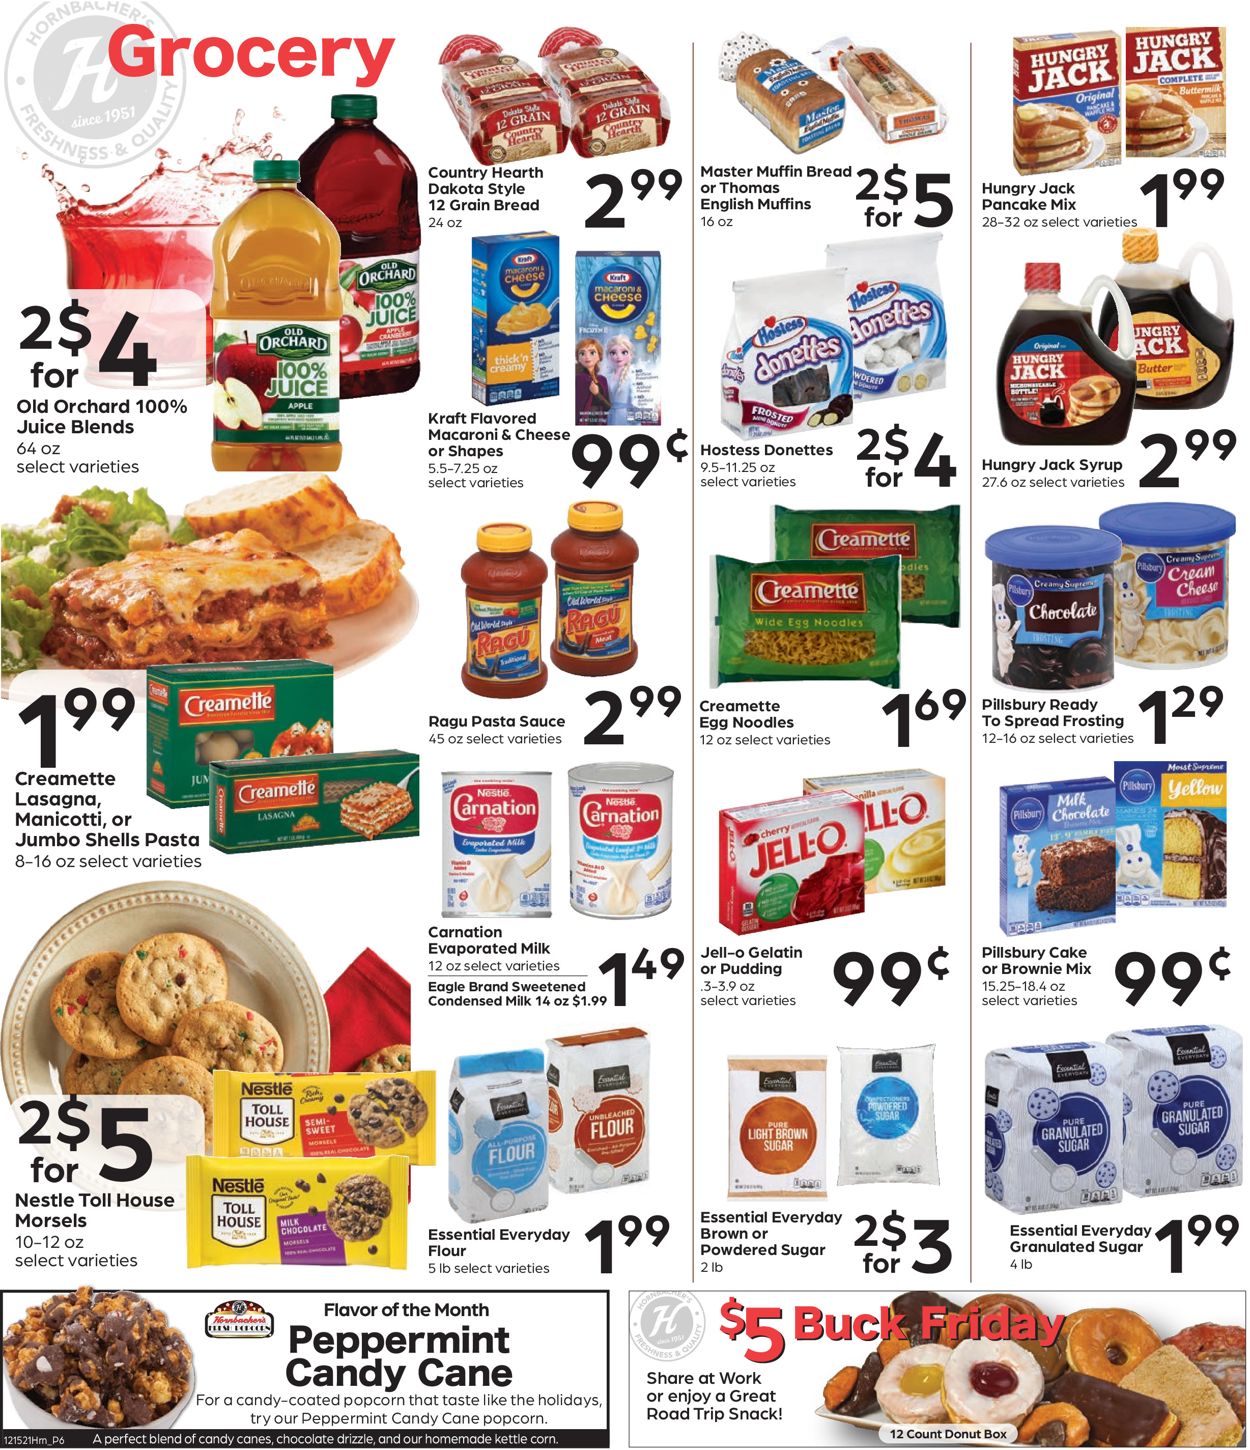 Hornbacher's HOLIDAYS 2021 Weekly Ad Circular - valid 12/15-12/28/2021 (Page 6)